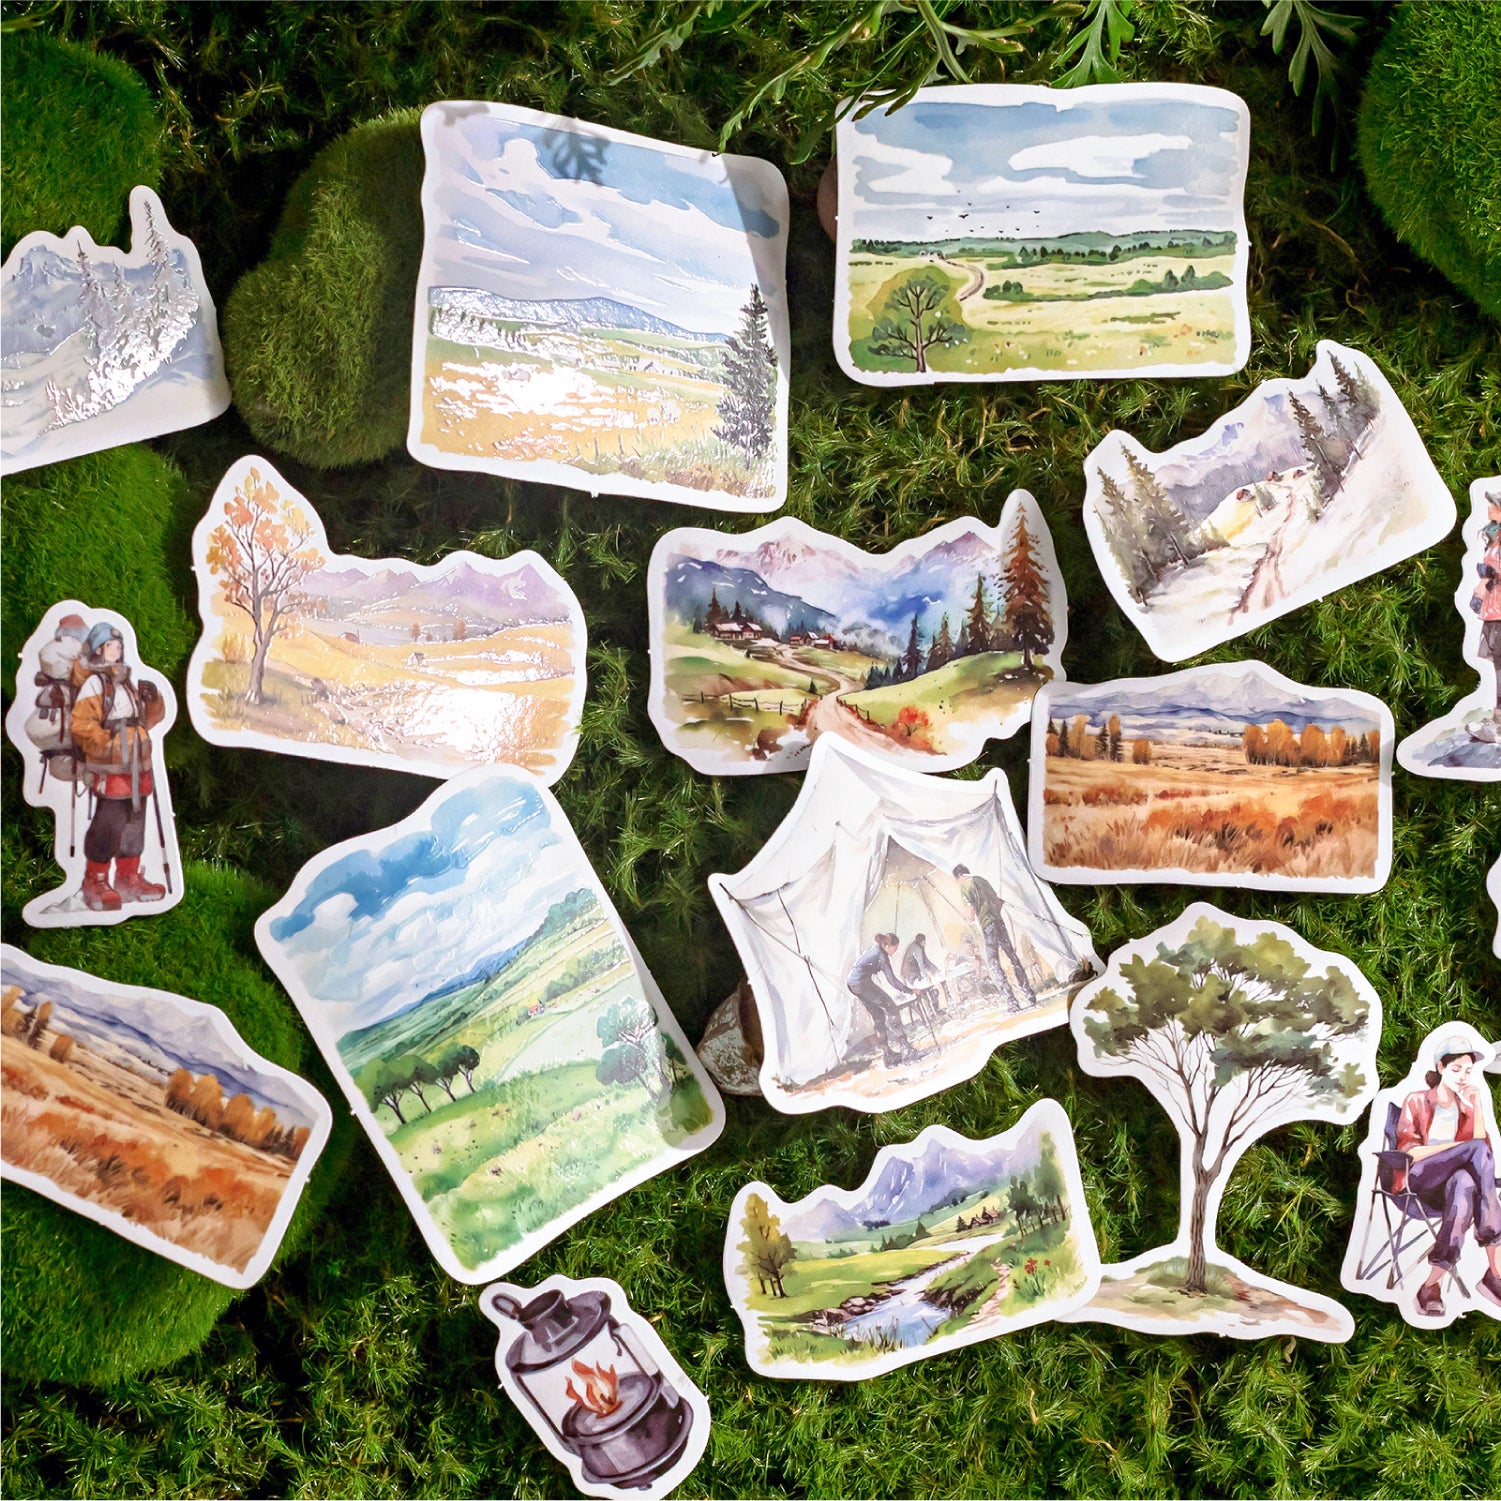 About Time Landscape Washi Stickers